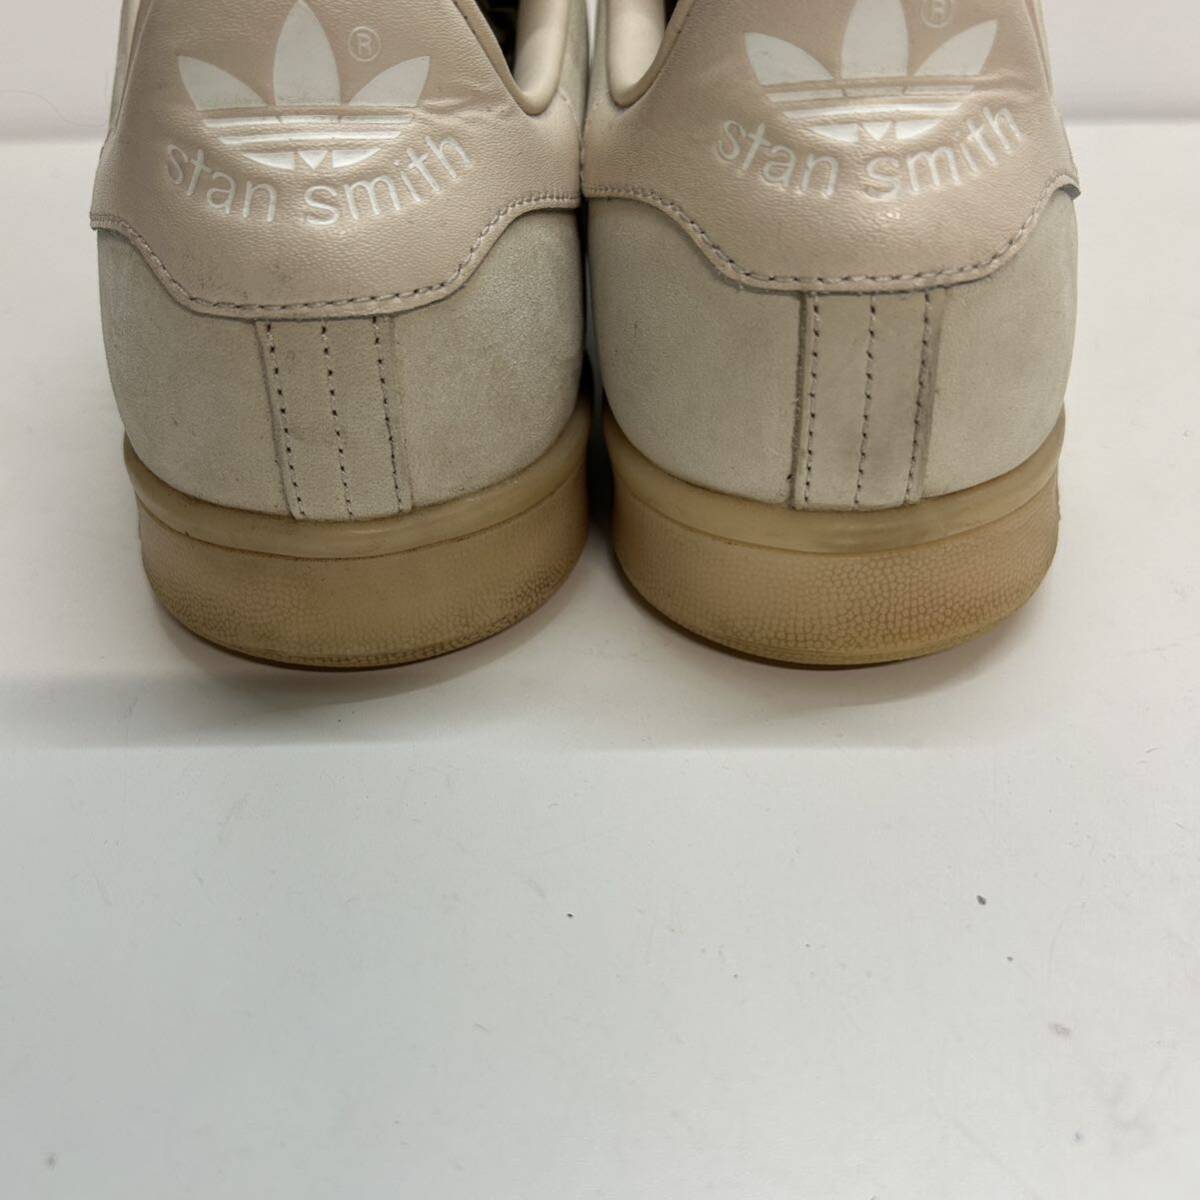 C424B adidas Adidas STAN SMITH Stansmith men's low cut sneakers US8.5 26.5cm beige n back style box attaching 